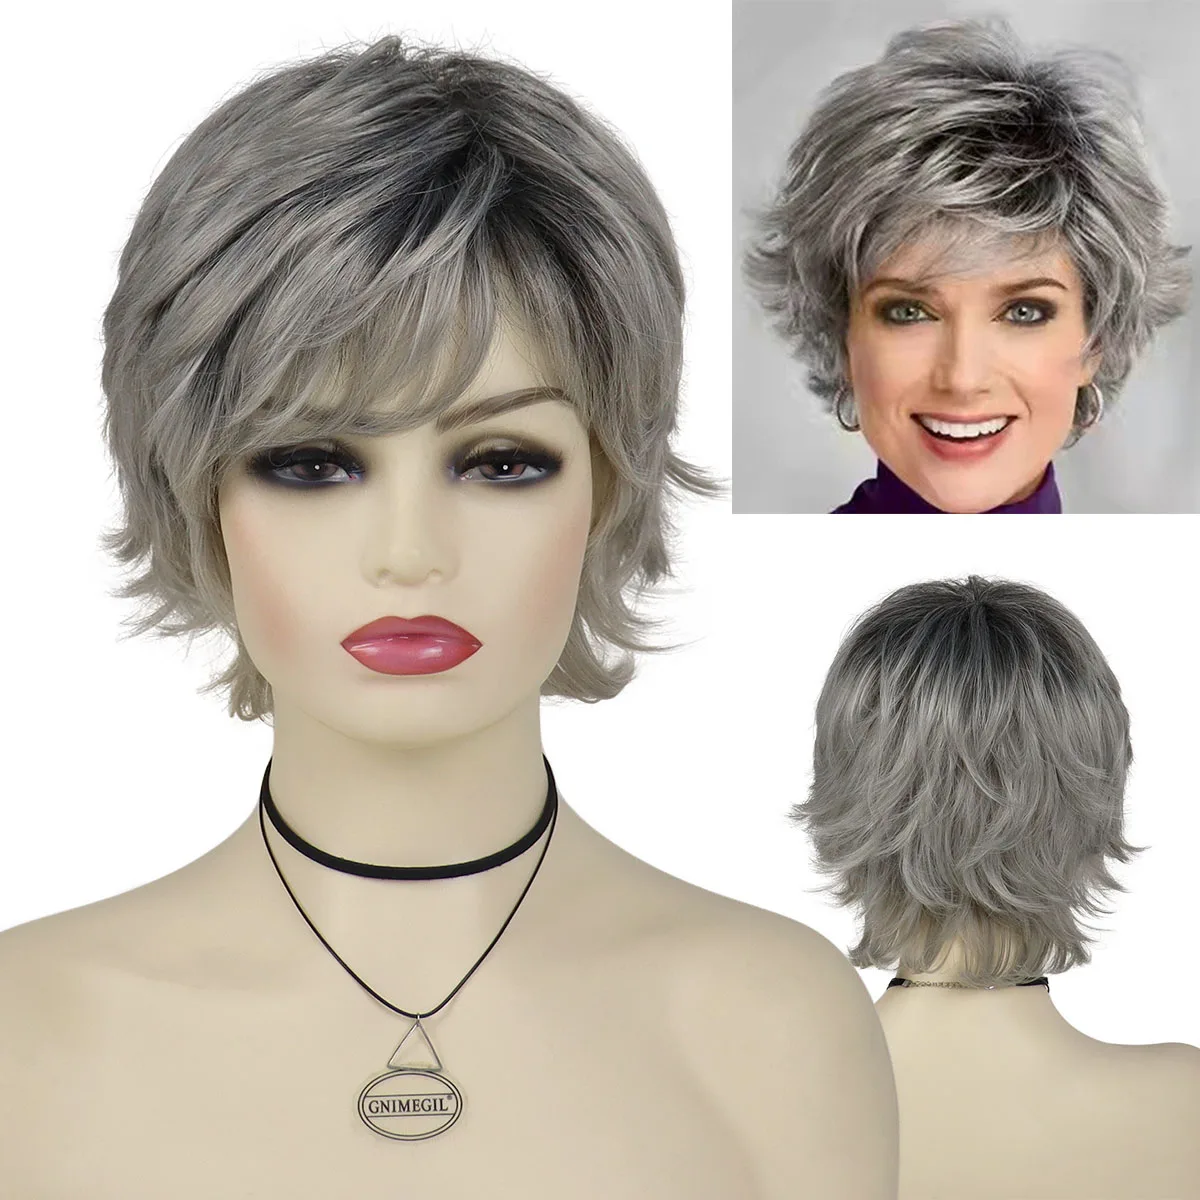 

GNIMEGIL Synthetc Wigs for White Women Ombre Gray Short Hair Curly Wig with Bangs Layered Haircut Mommy Hairstyle Old Lady Wig